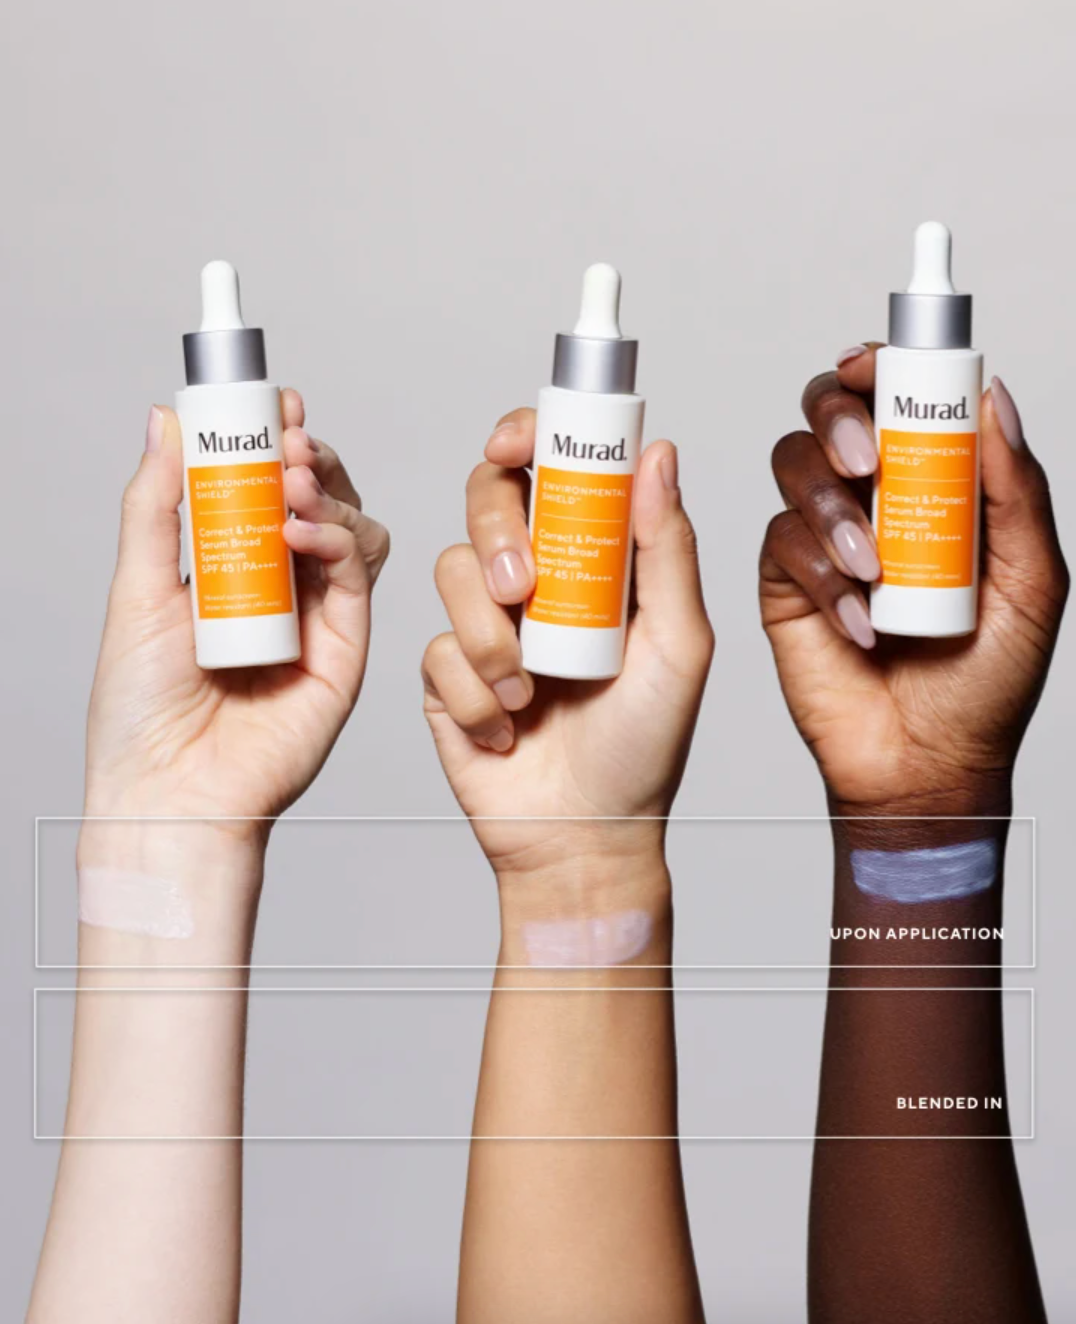 the formula applied to three different shades of skin showing it doesn't leave white cast